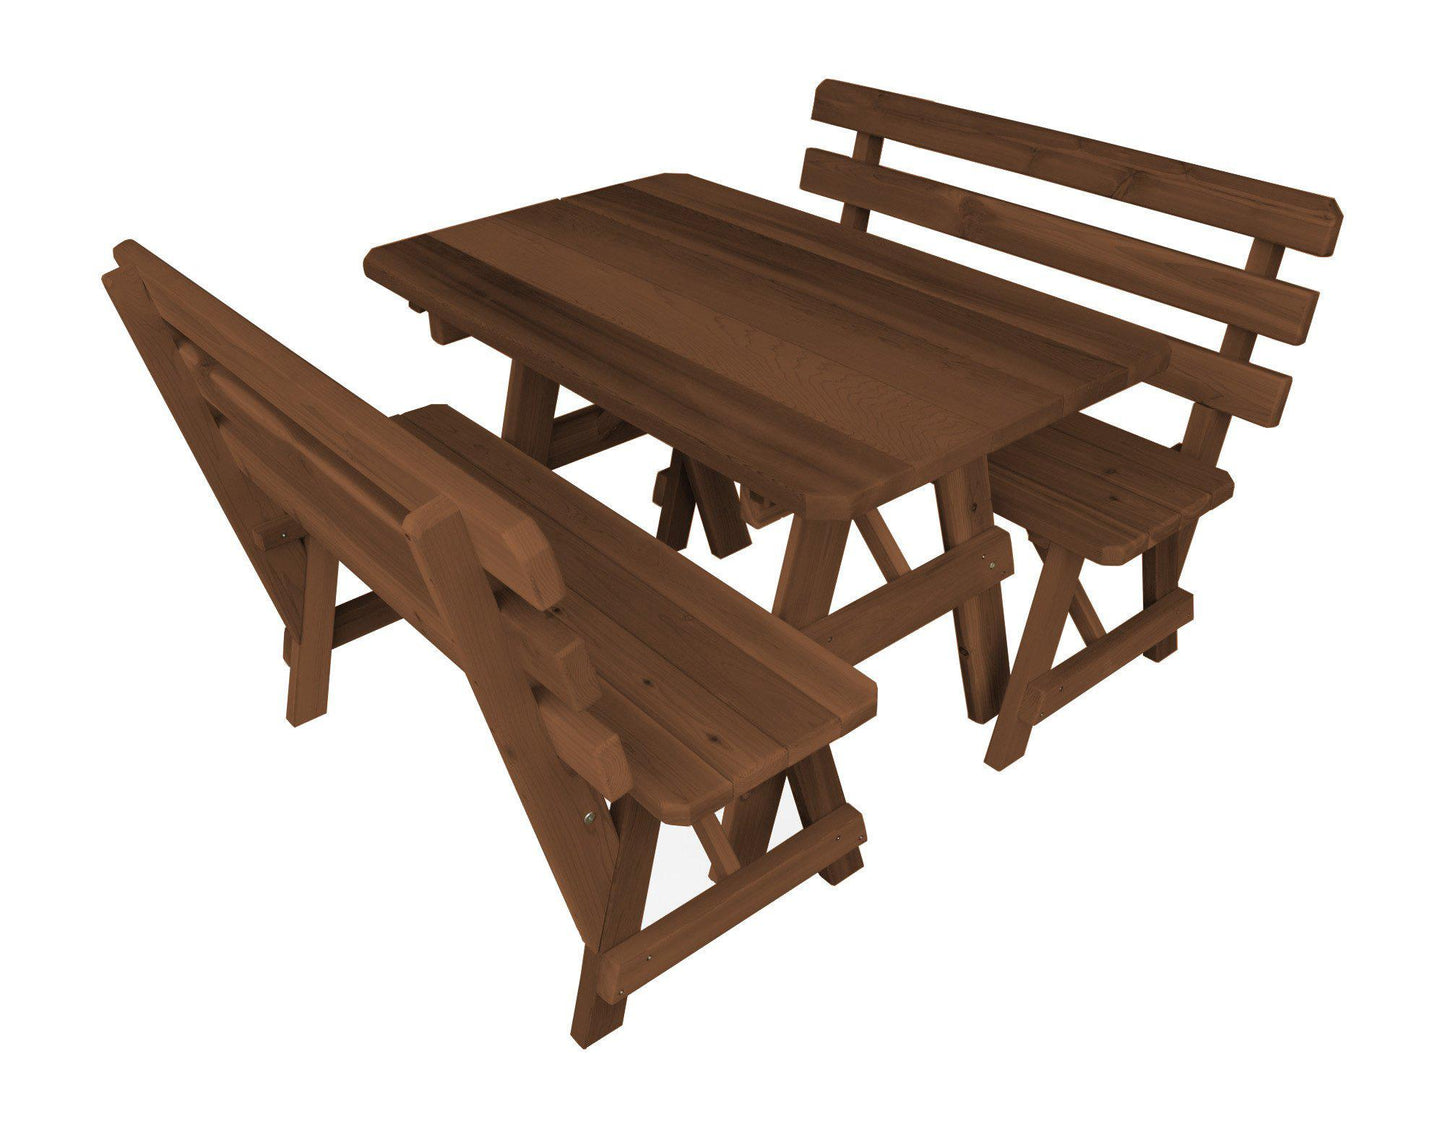 Regallion Outdoor Western Red Cedar 55" Table w/2 Backed Benches - LEAD TIME TO SHIP 2 WEEKS